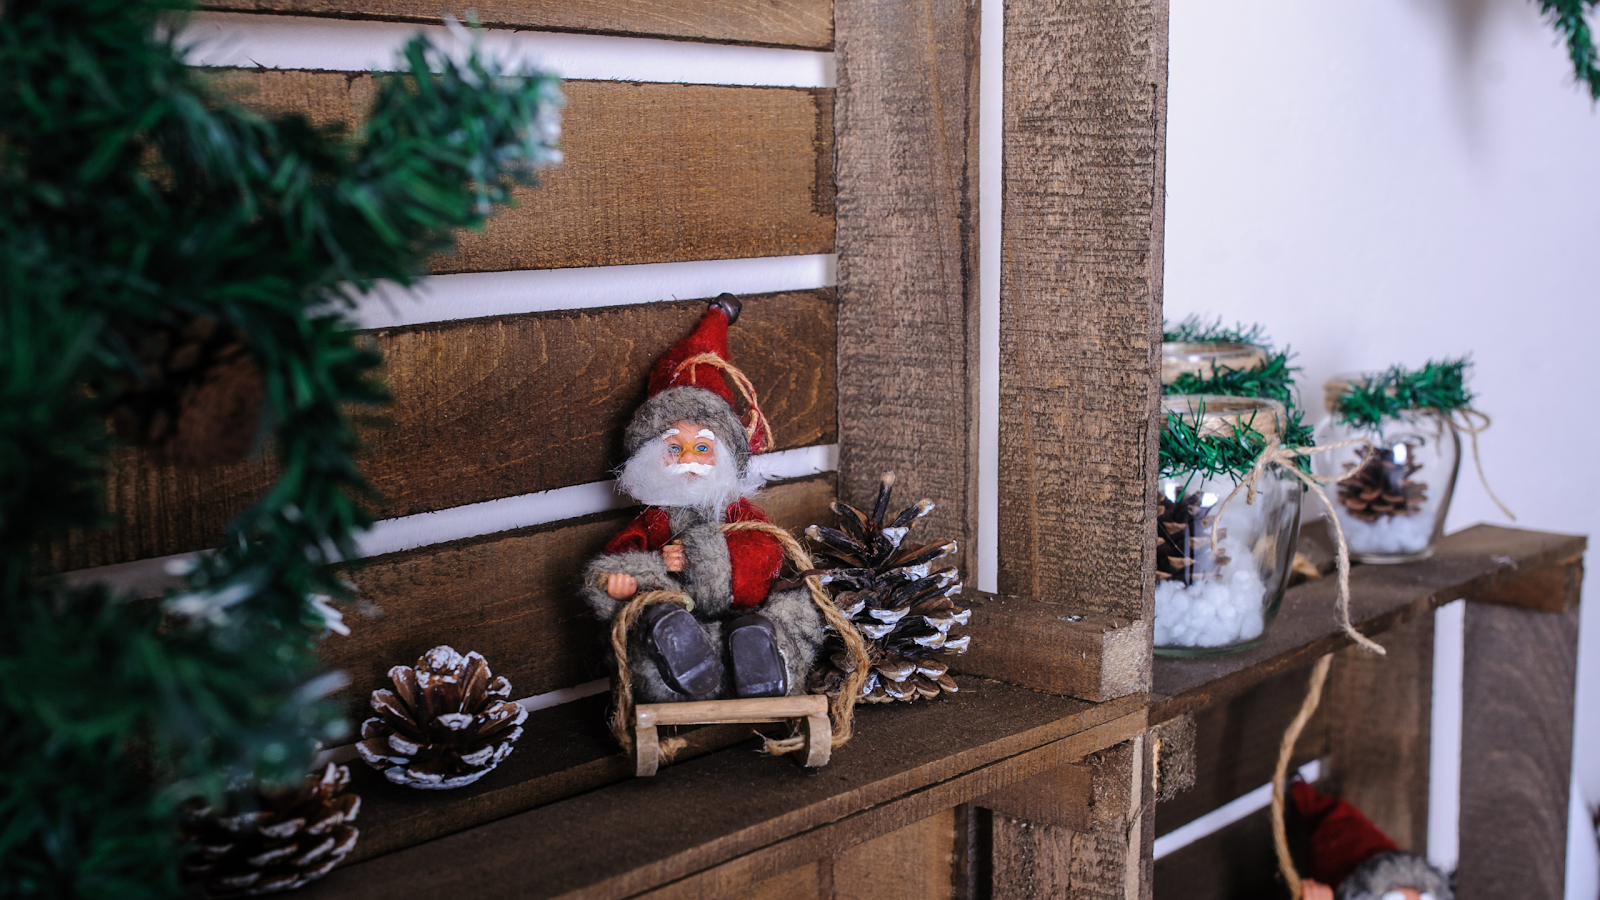 Wood-inspired Christmas decors at home in the living room with a santa clause, trees, and wooden wall finishes in a condo for sale